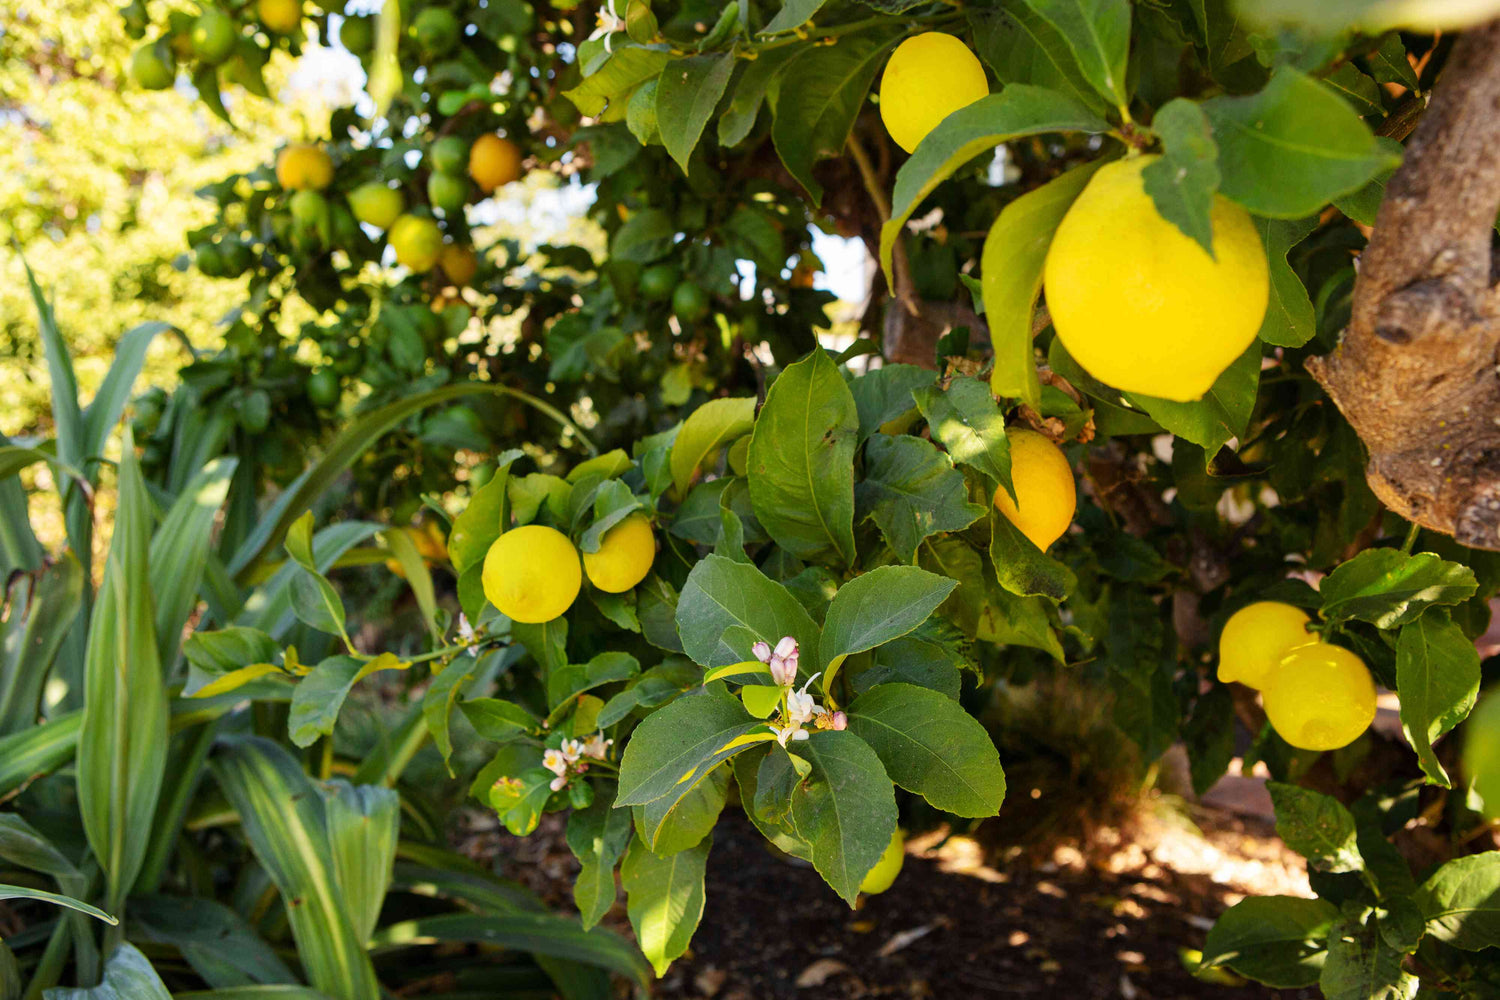 Lemon Tree - A photo of a lemon tree, typically featuring a small to medium-sized tree with a rounded canopy, glossy green leaves, and fragrant flowers. The leaves are lance-shaped and have a glossy appearance. The tree produces small, oval-shaped fruits known as lemons, which are yellow in color with a thick, textured rind.